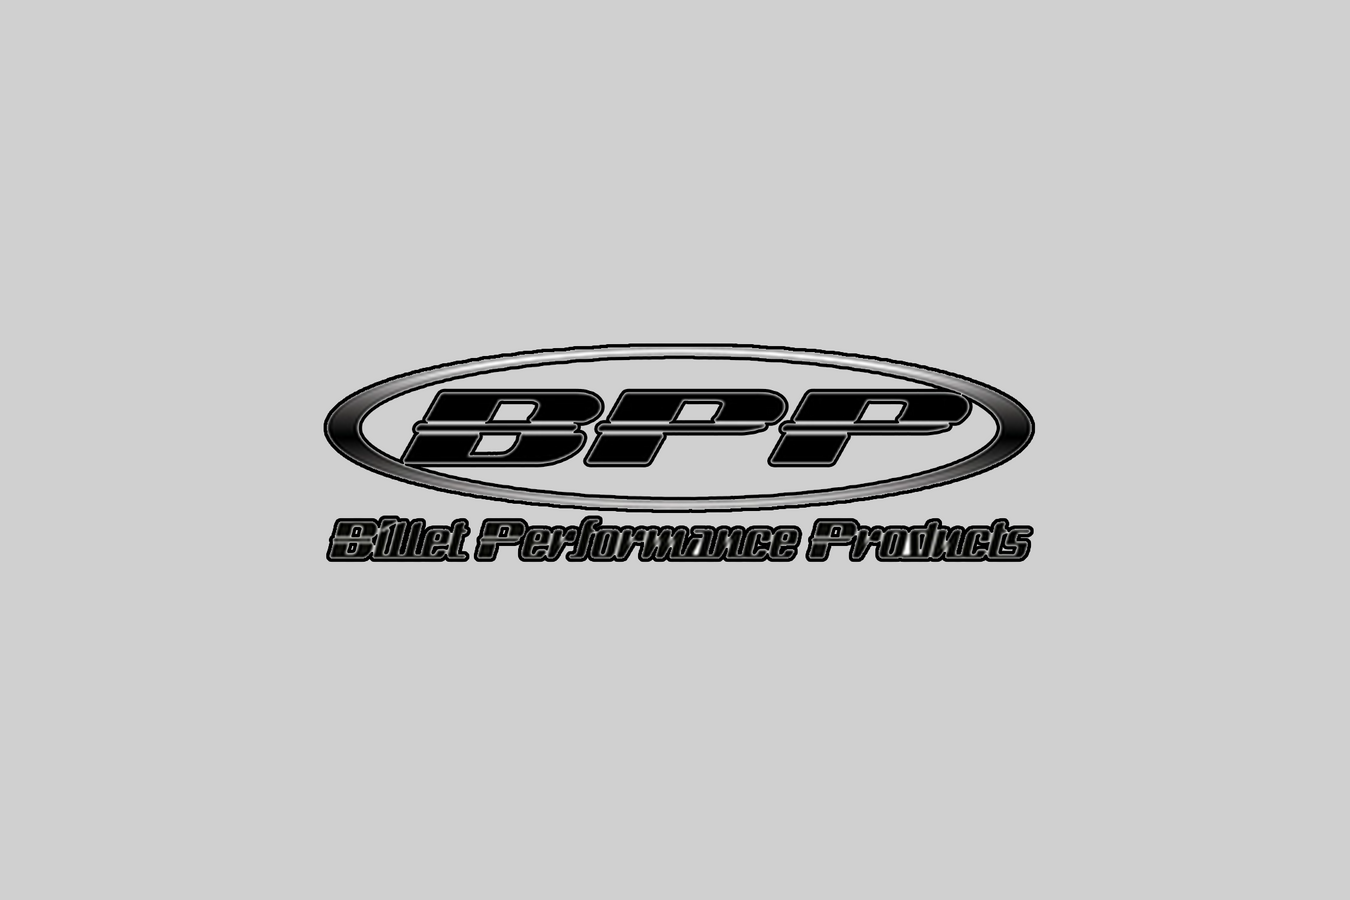 Billet-Performance-Products-BPP Goleby's Parts